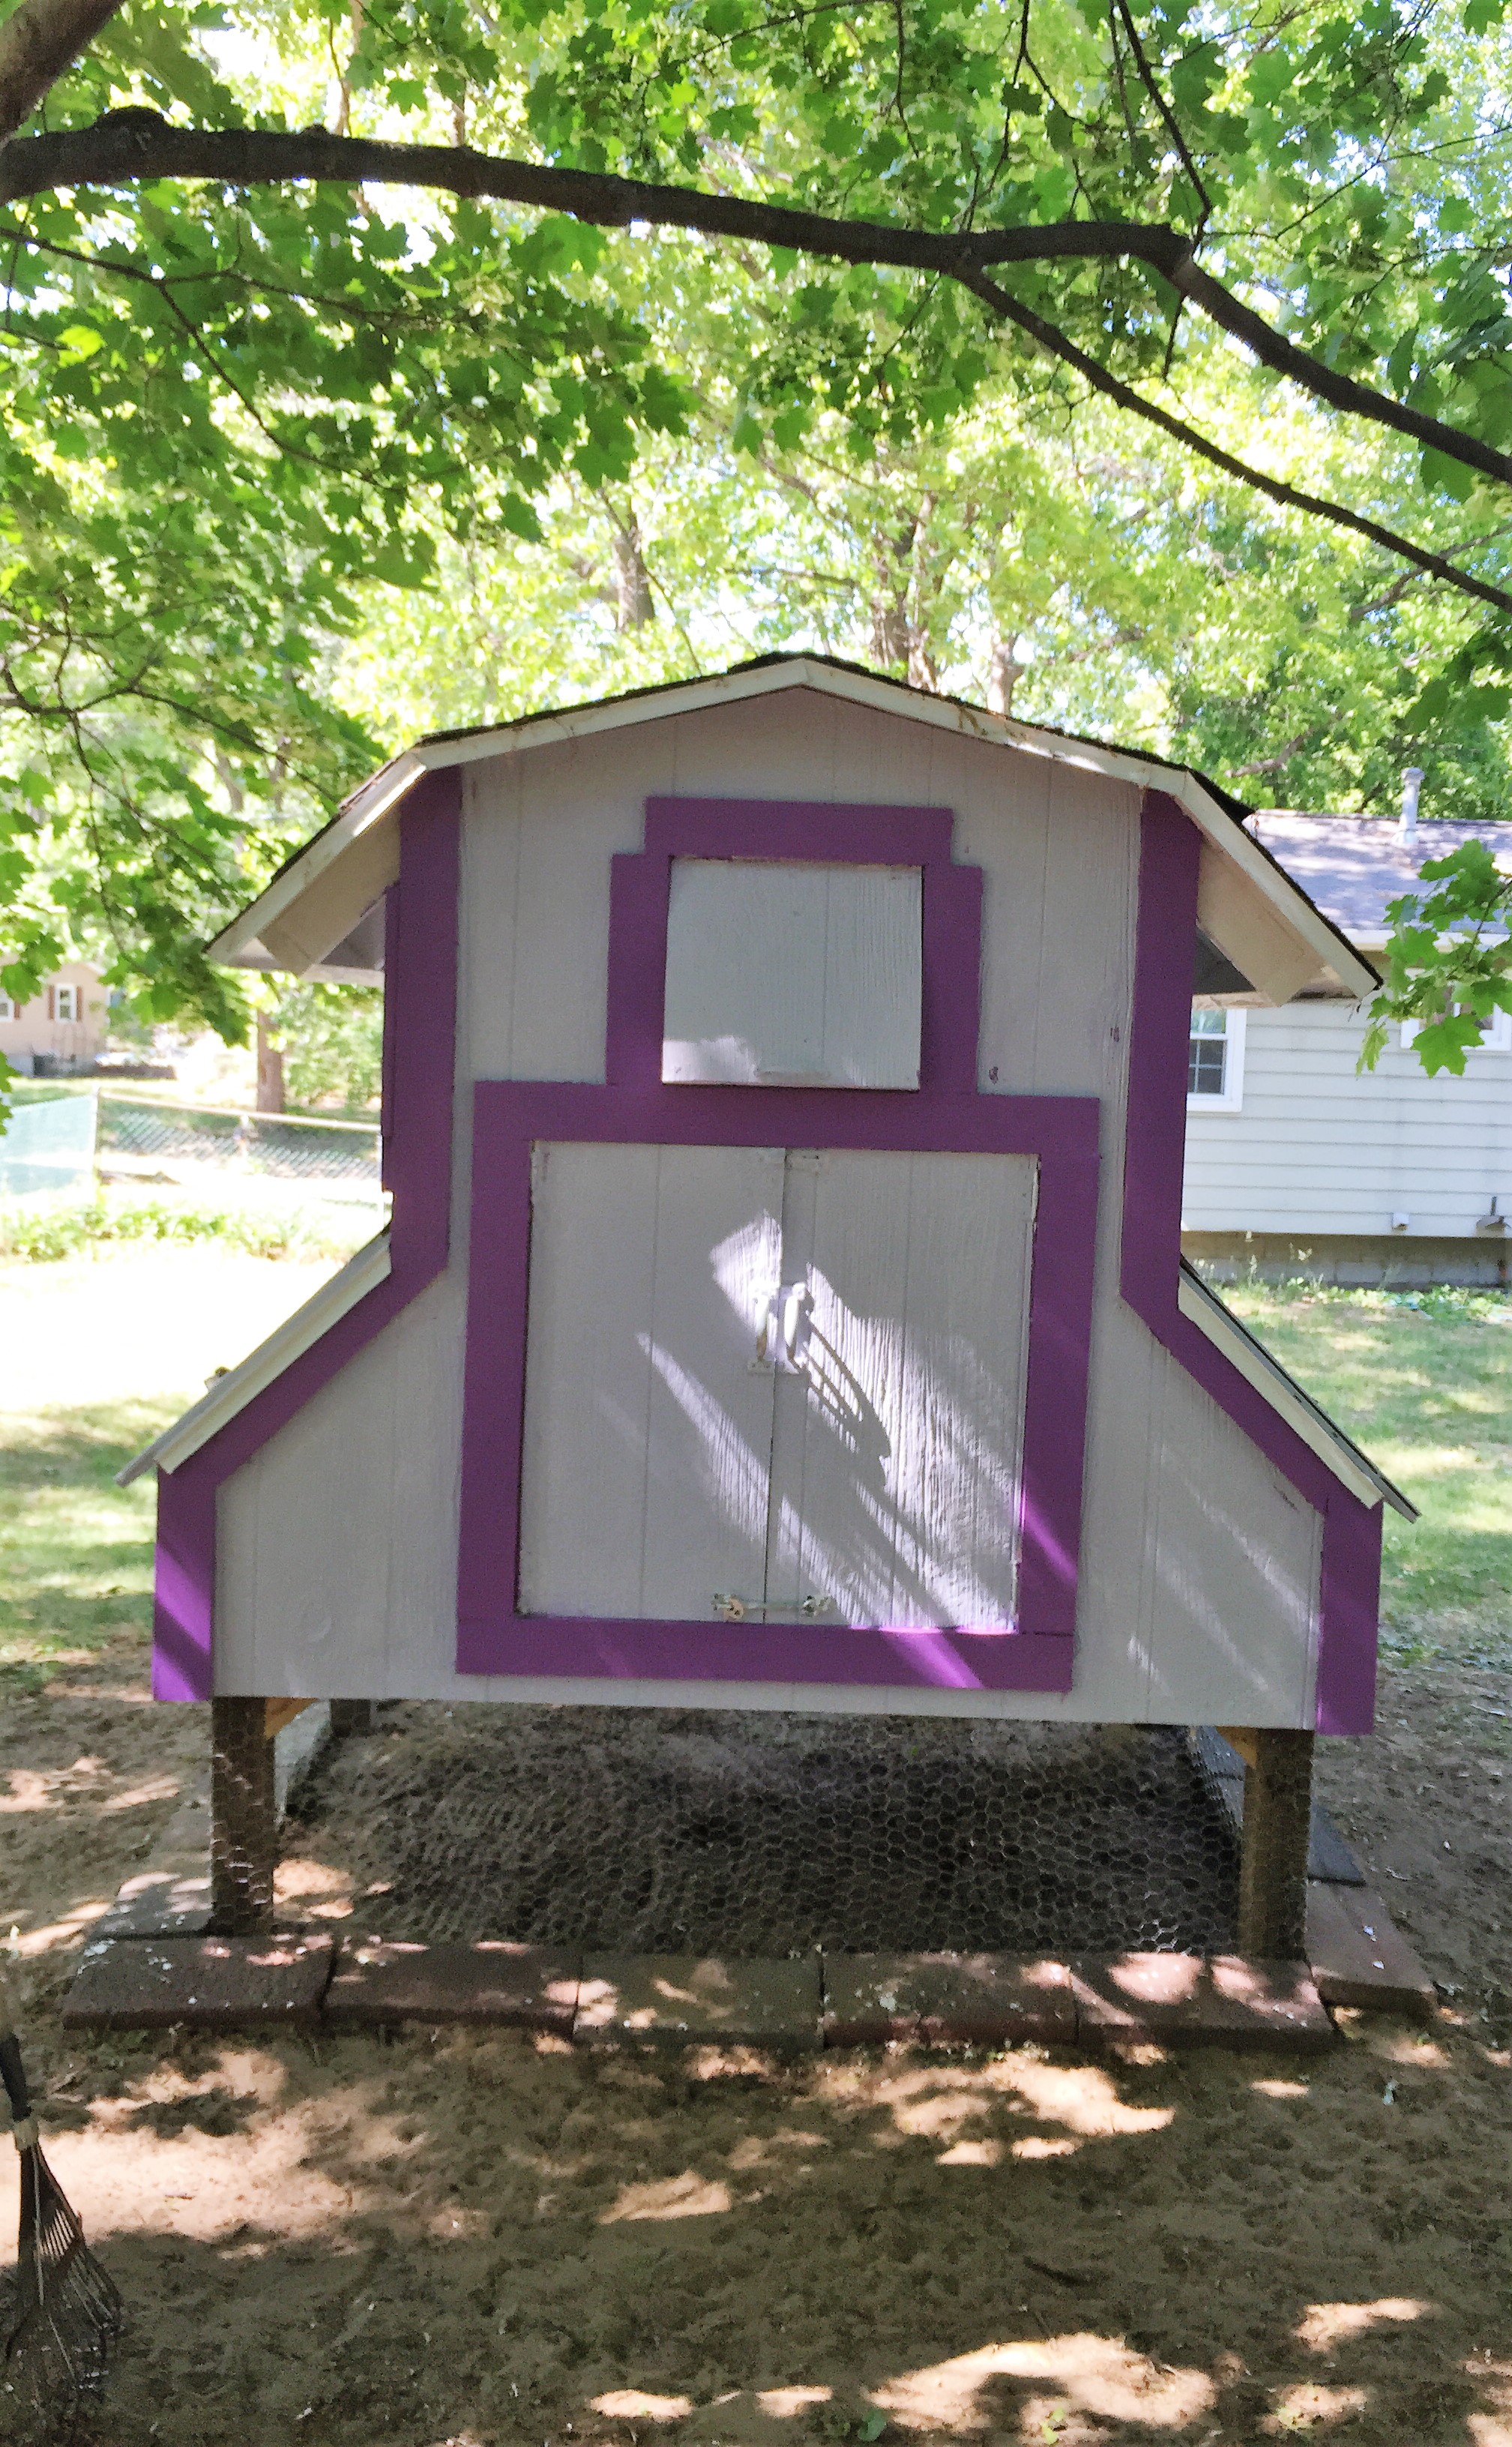 This is the back door to the coop and a window that can be left open for ventilation when needed.